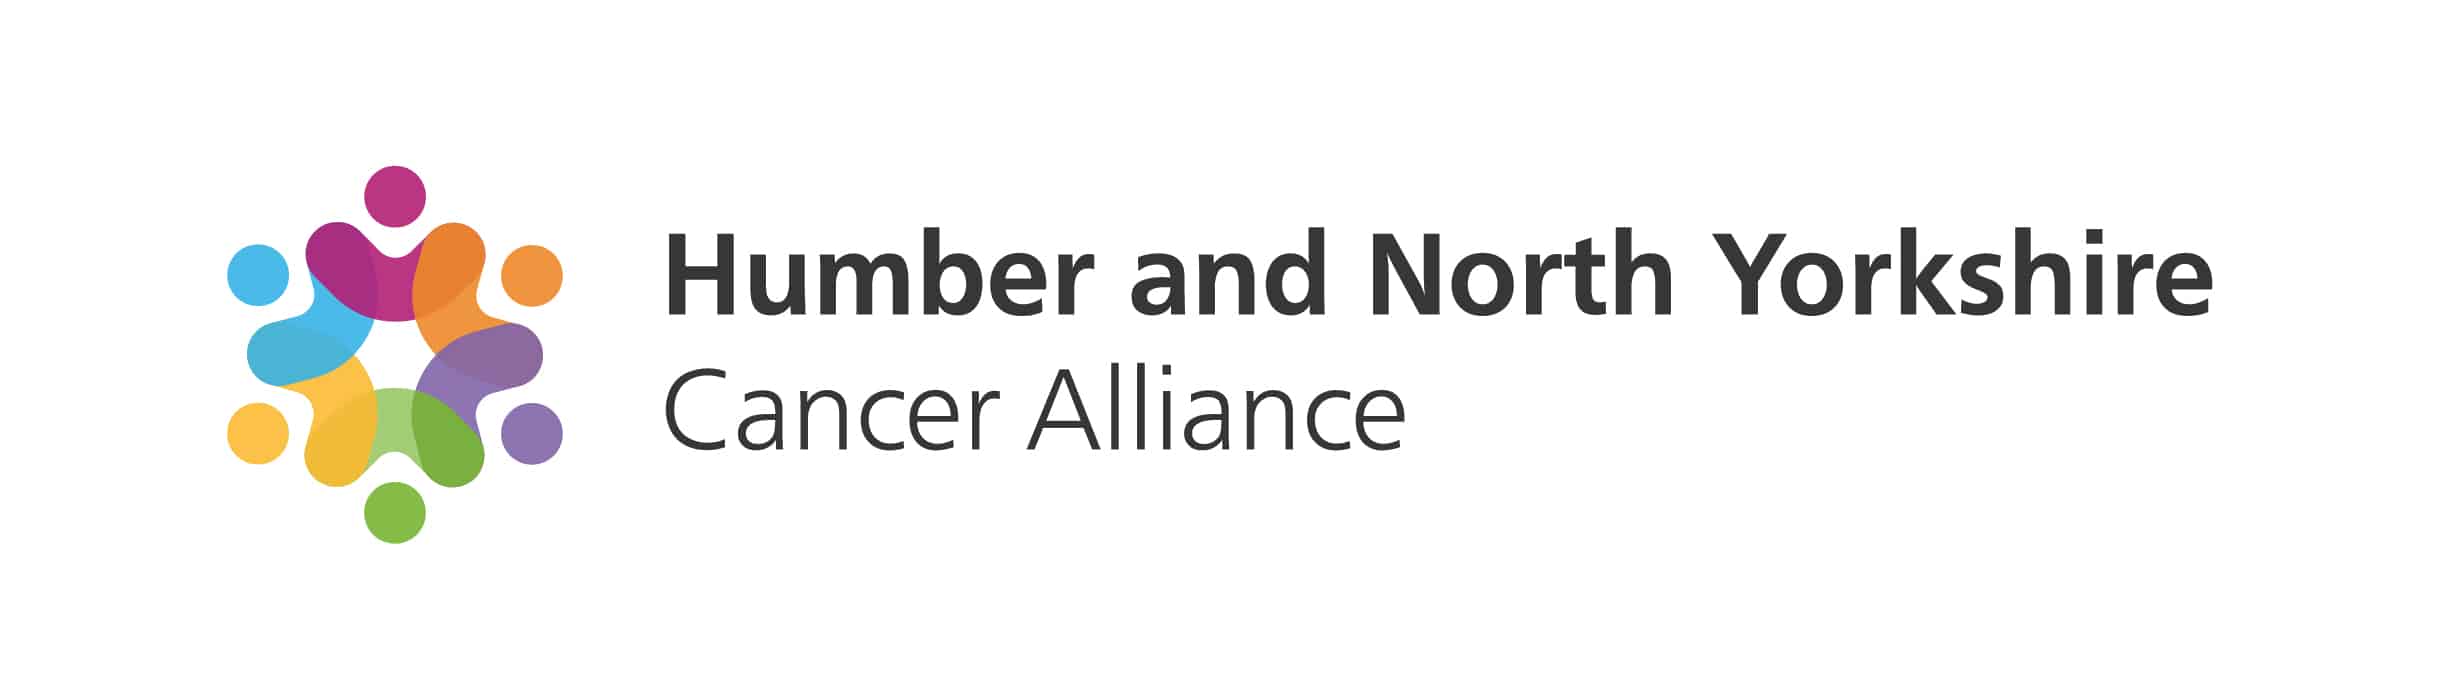 Humber and North Yorkshire Cancer Alliance logo.